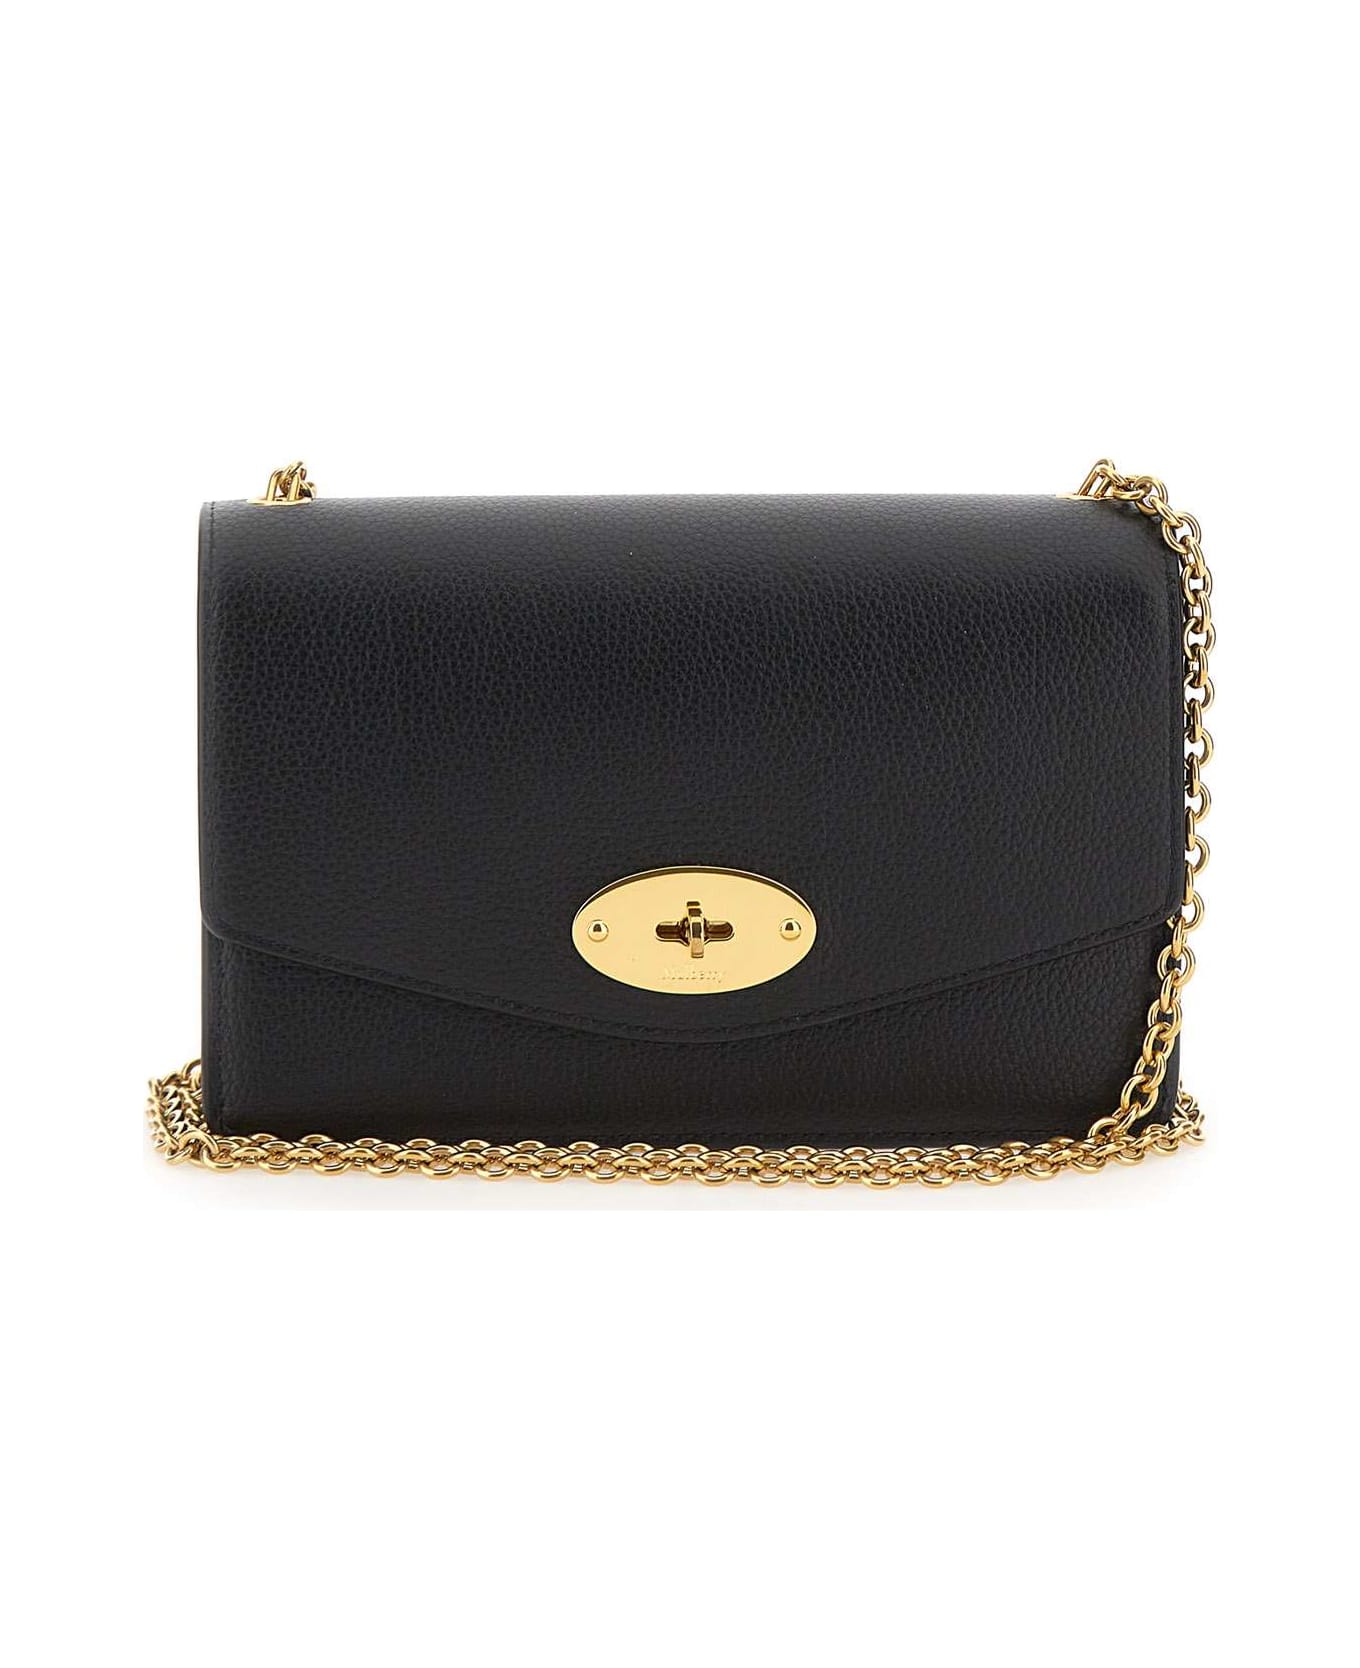 Mulberry 'small Darley' Leather Bag - Black ショルダーバッグ